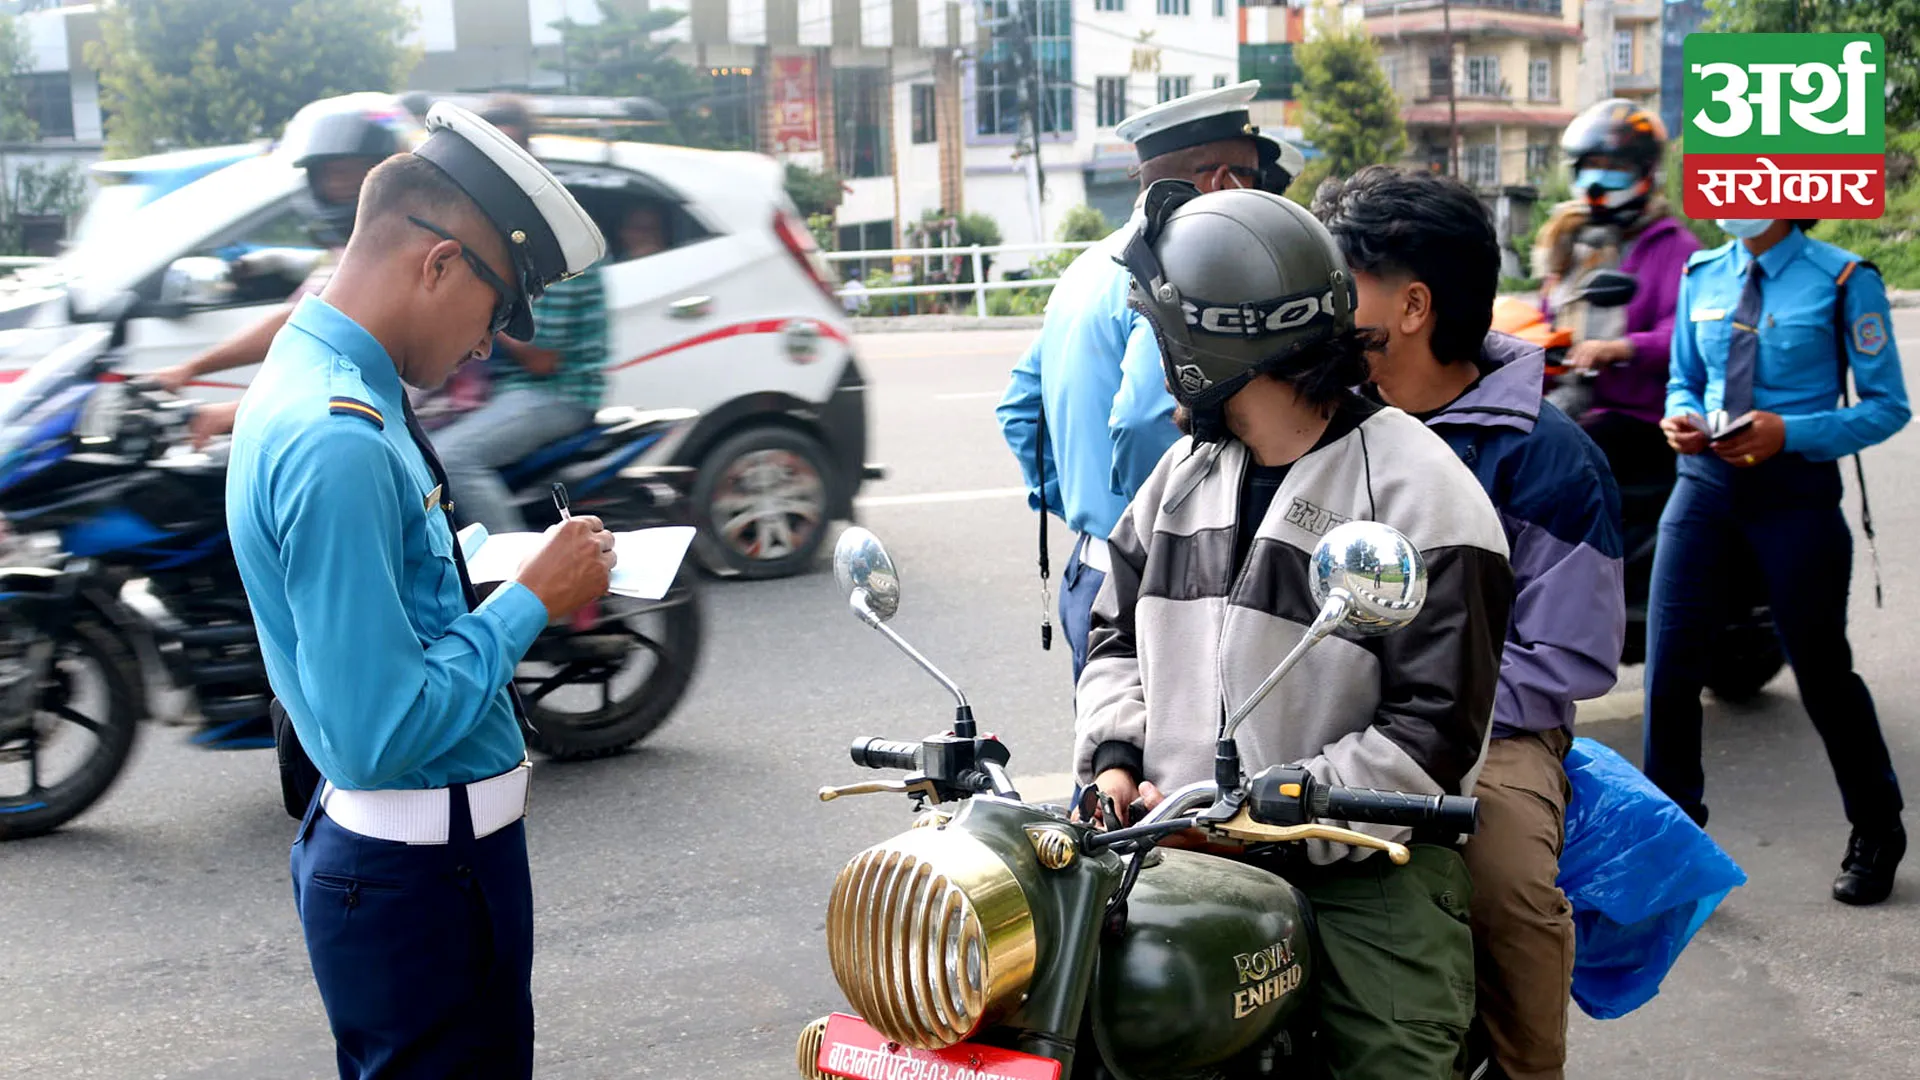 KVTPO intensifies checking; more than 1,500 offenders have faced action in the last 24 hours